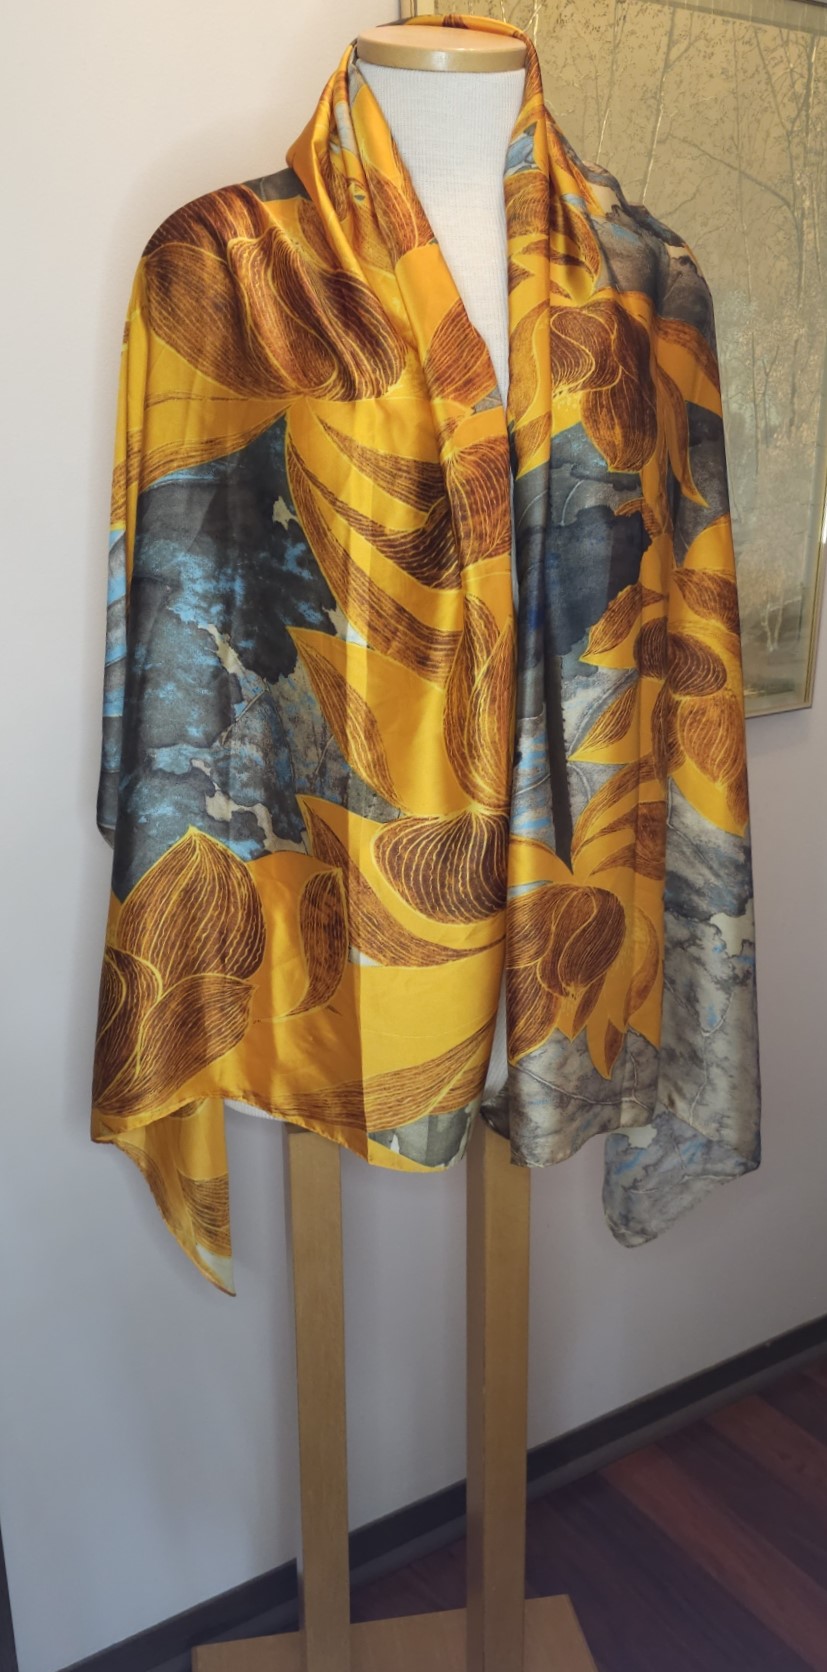 This Modern Shawl Wrap / Scarf / Beachwear/ Sarong Cover-up - Sunflowers and Teal - Polyester Silk Blend - 35" x 72" is made with love by The Creative Soul Sisters! Shop more unique gift ideas today with Spots Initiatives, the best way to support creators.